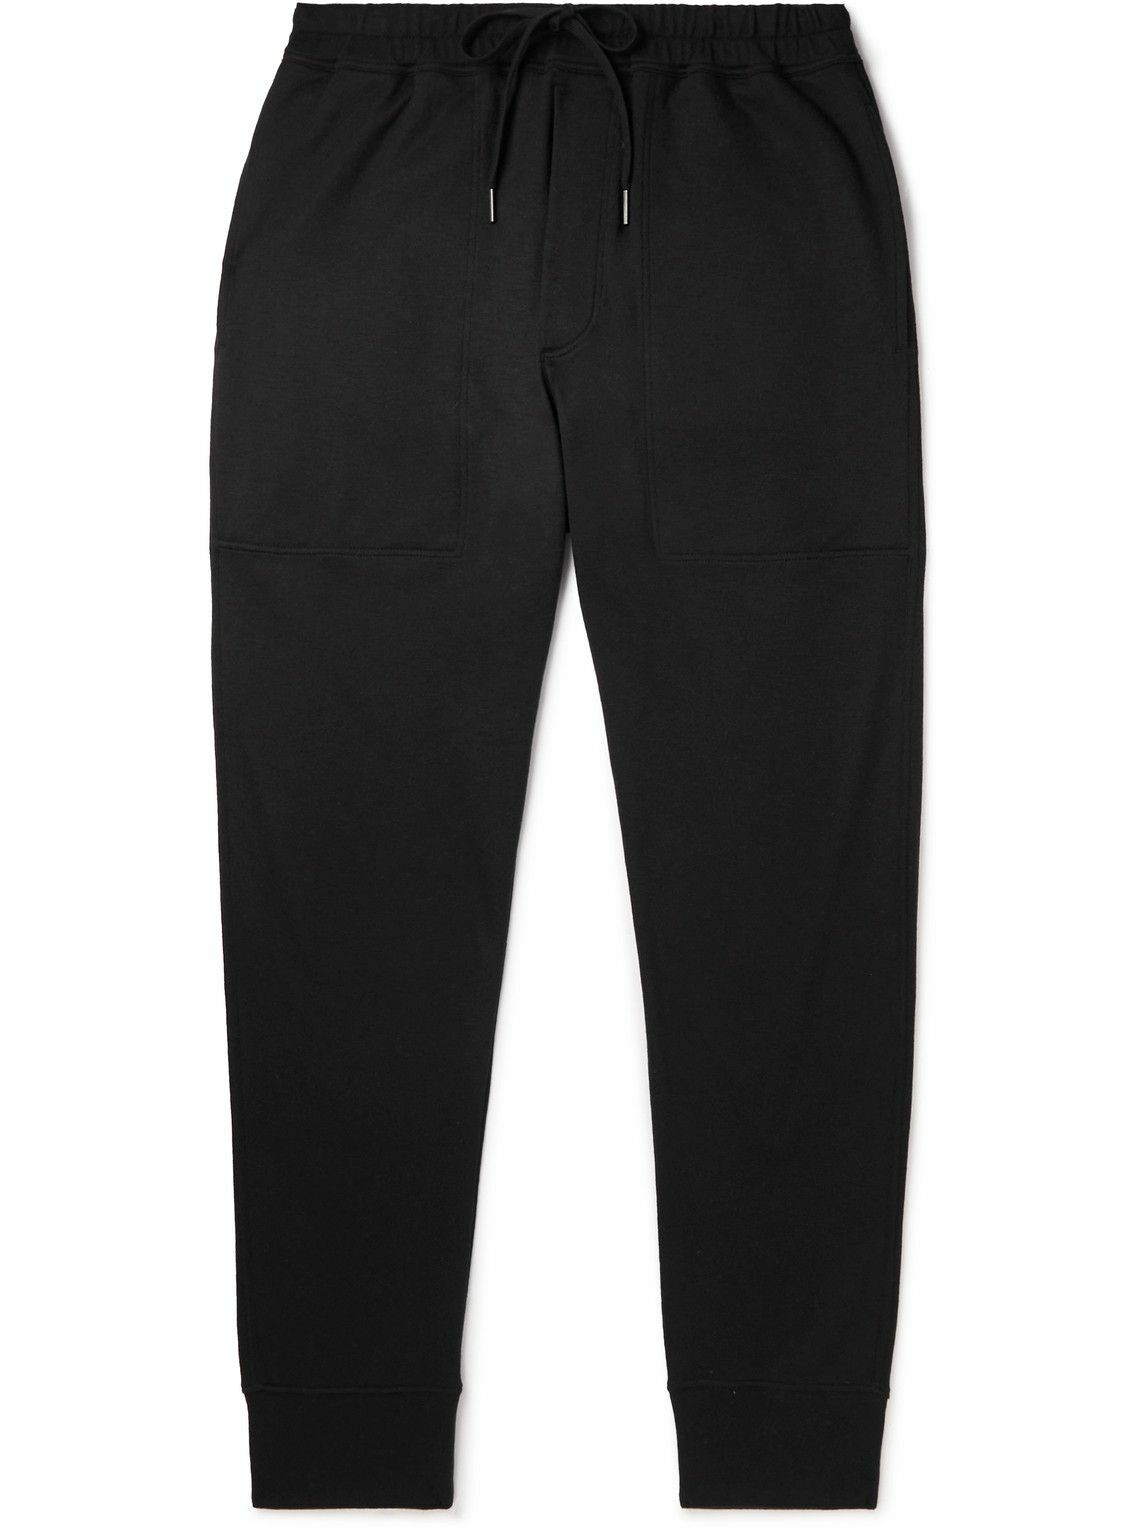 TOM FORD - Tapered Cashmere Sweatpants - Black TOM FORD